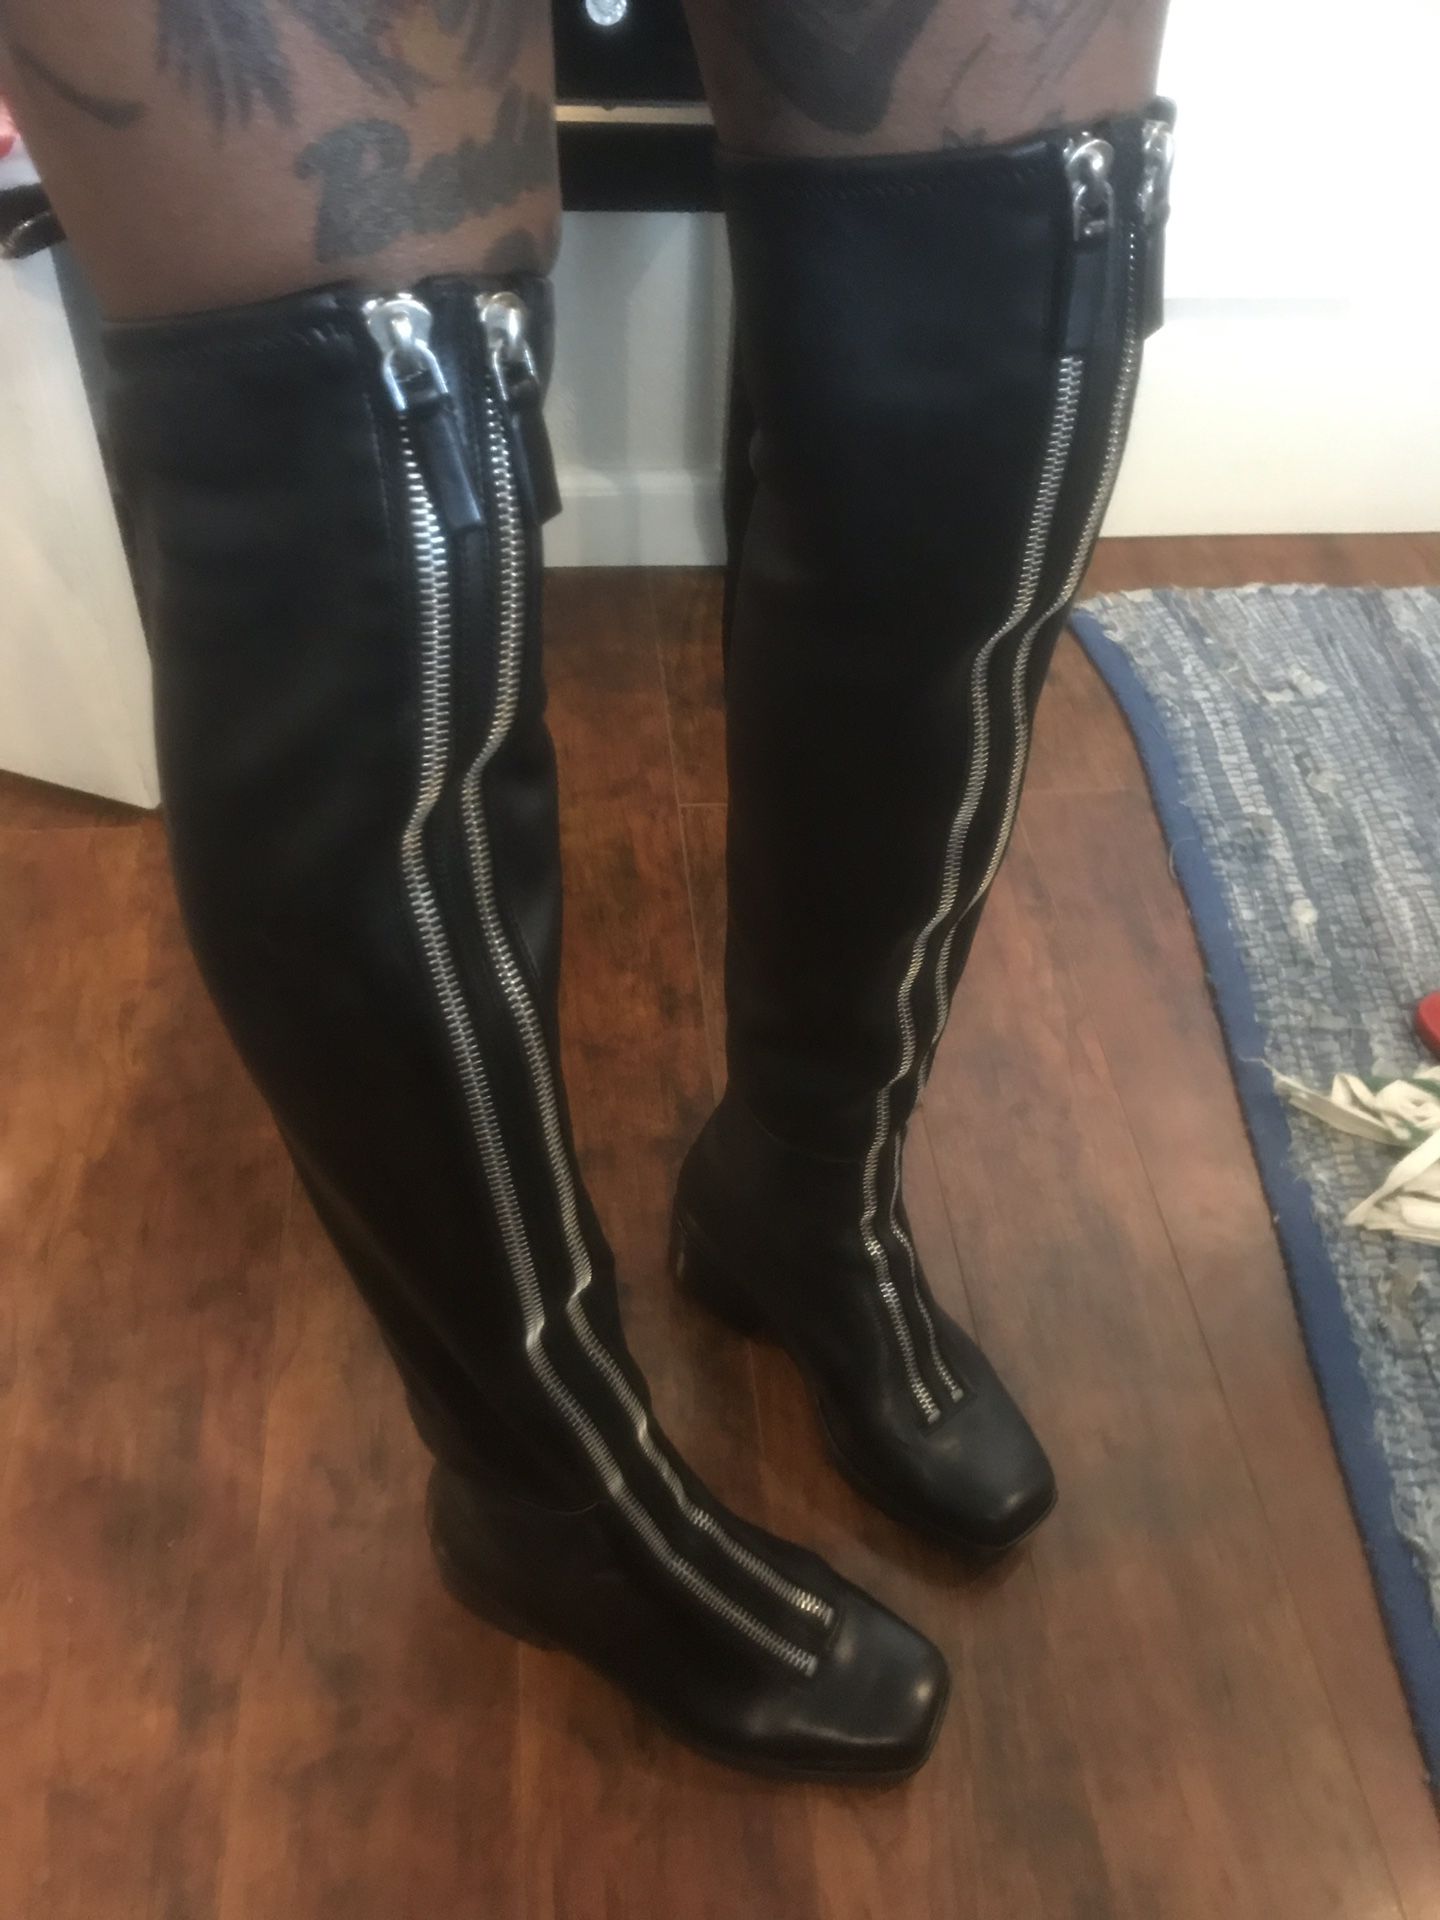 Alexander Wang thigh high leather boots size 7.5